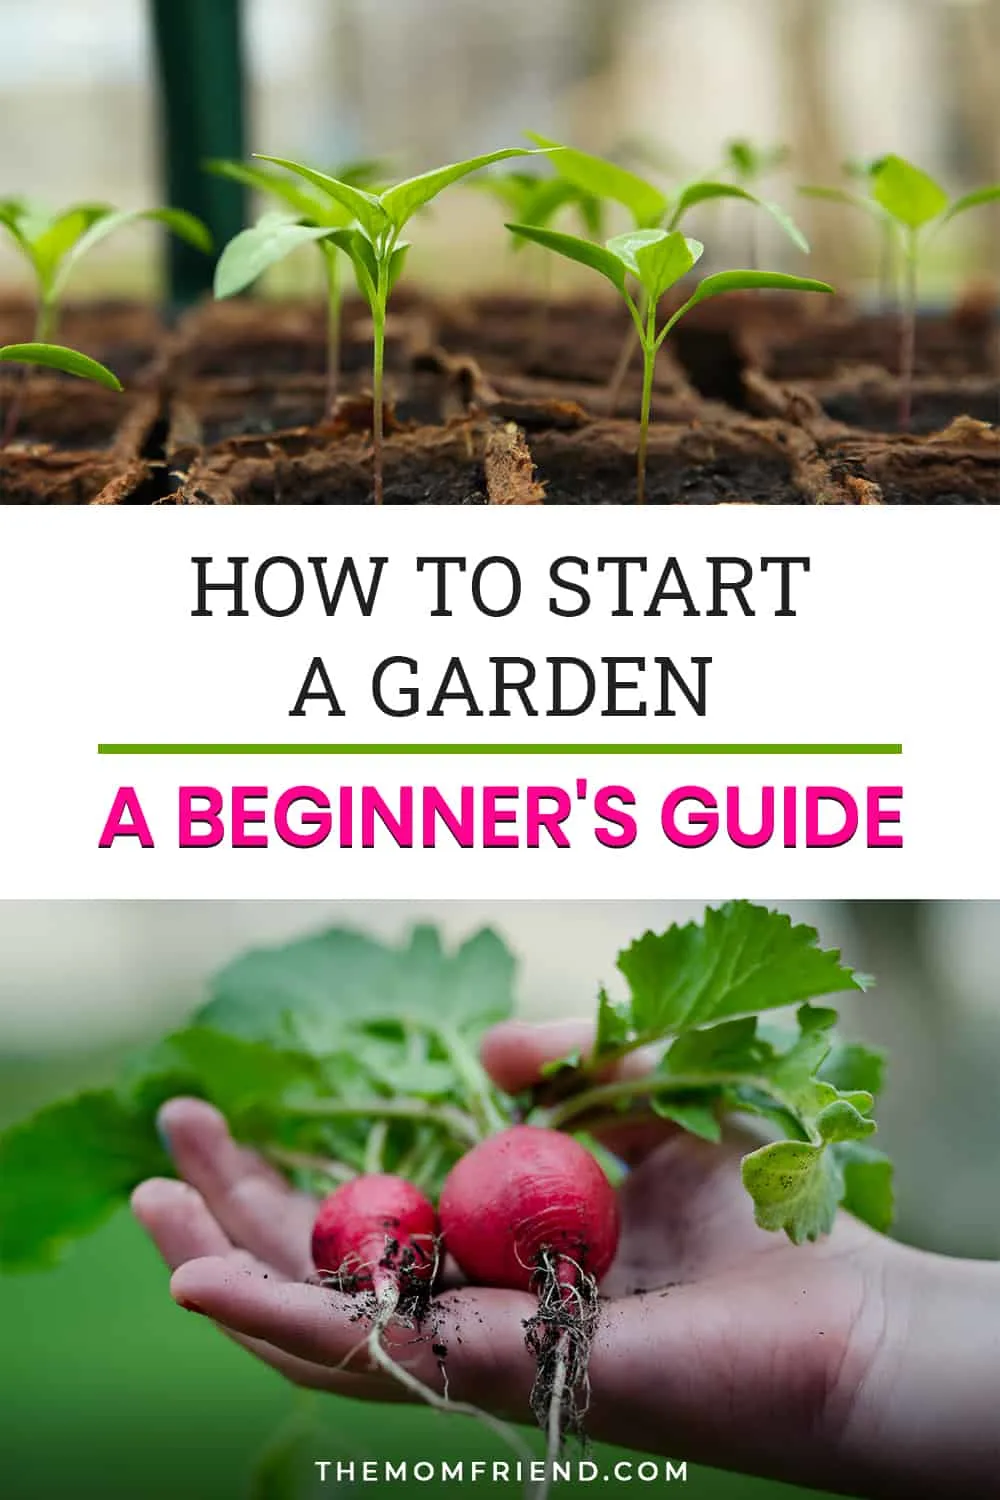 Pinnable image of how to start a garden.